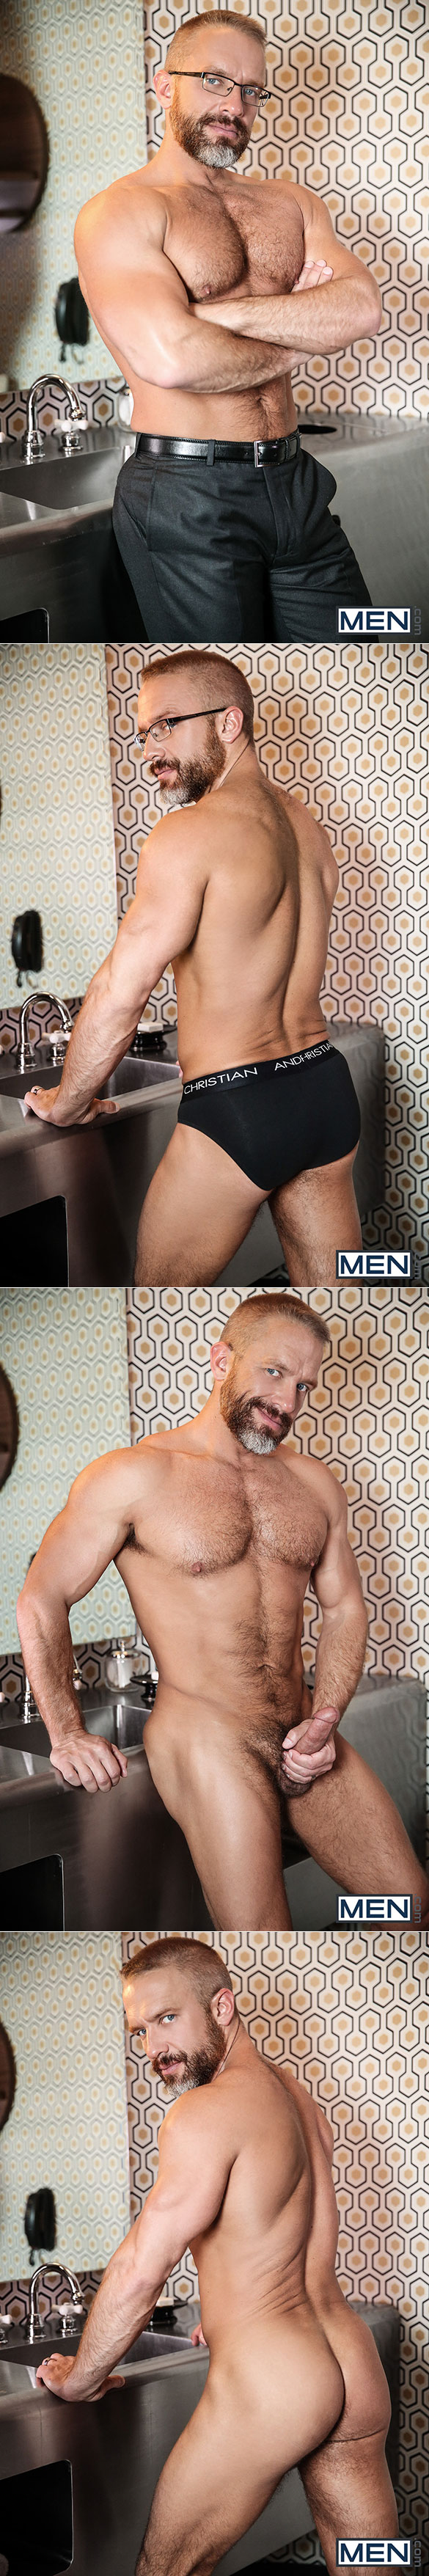 Men.com: Dirk Caber bangs Griffin Barrows in "Taking Down the Conservatives, Part 2"